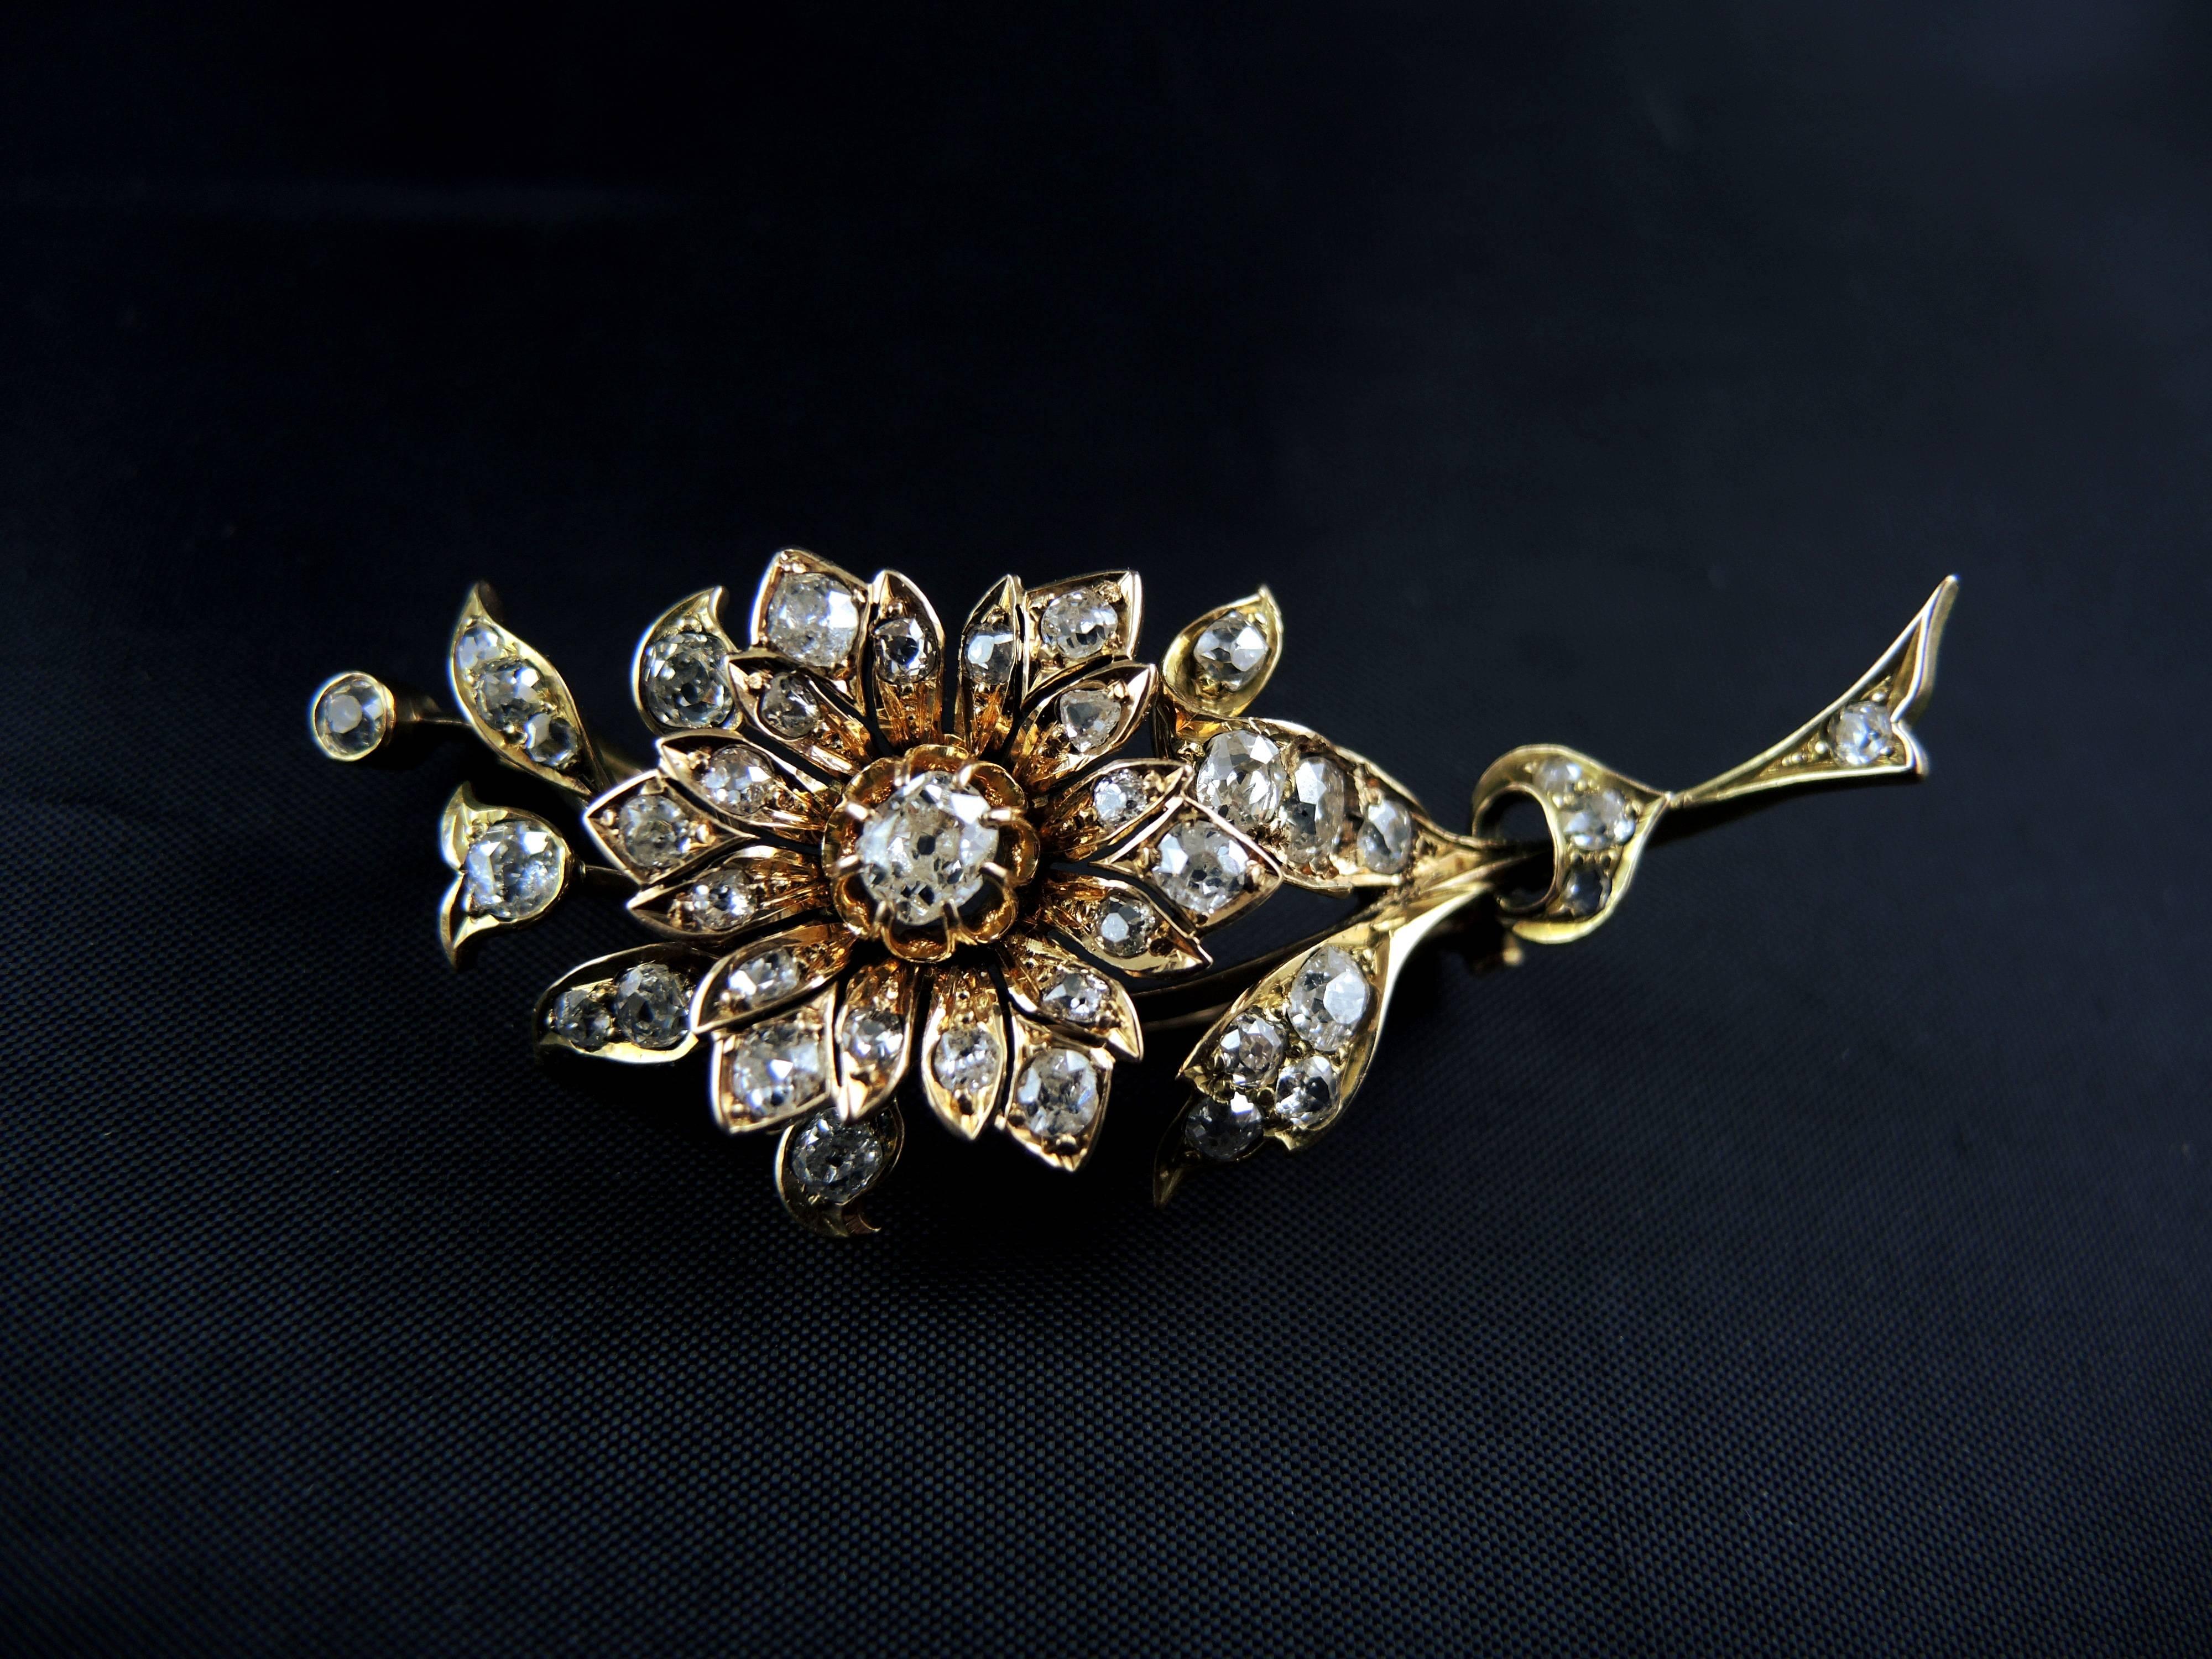 A stunning diamond flower brooch from the Napoleon III era (circa 1860) made of 14kt gold (hallmark: scallop).

The brooch is set with old and rose cut diamonds, which total weight is estimated around 2,40 Cts.

Lenght: 5,50 g
Weight: 10,90 g